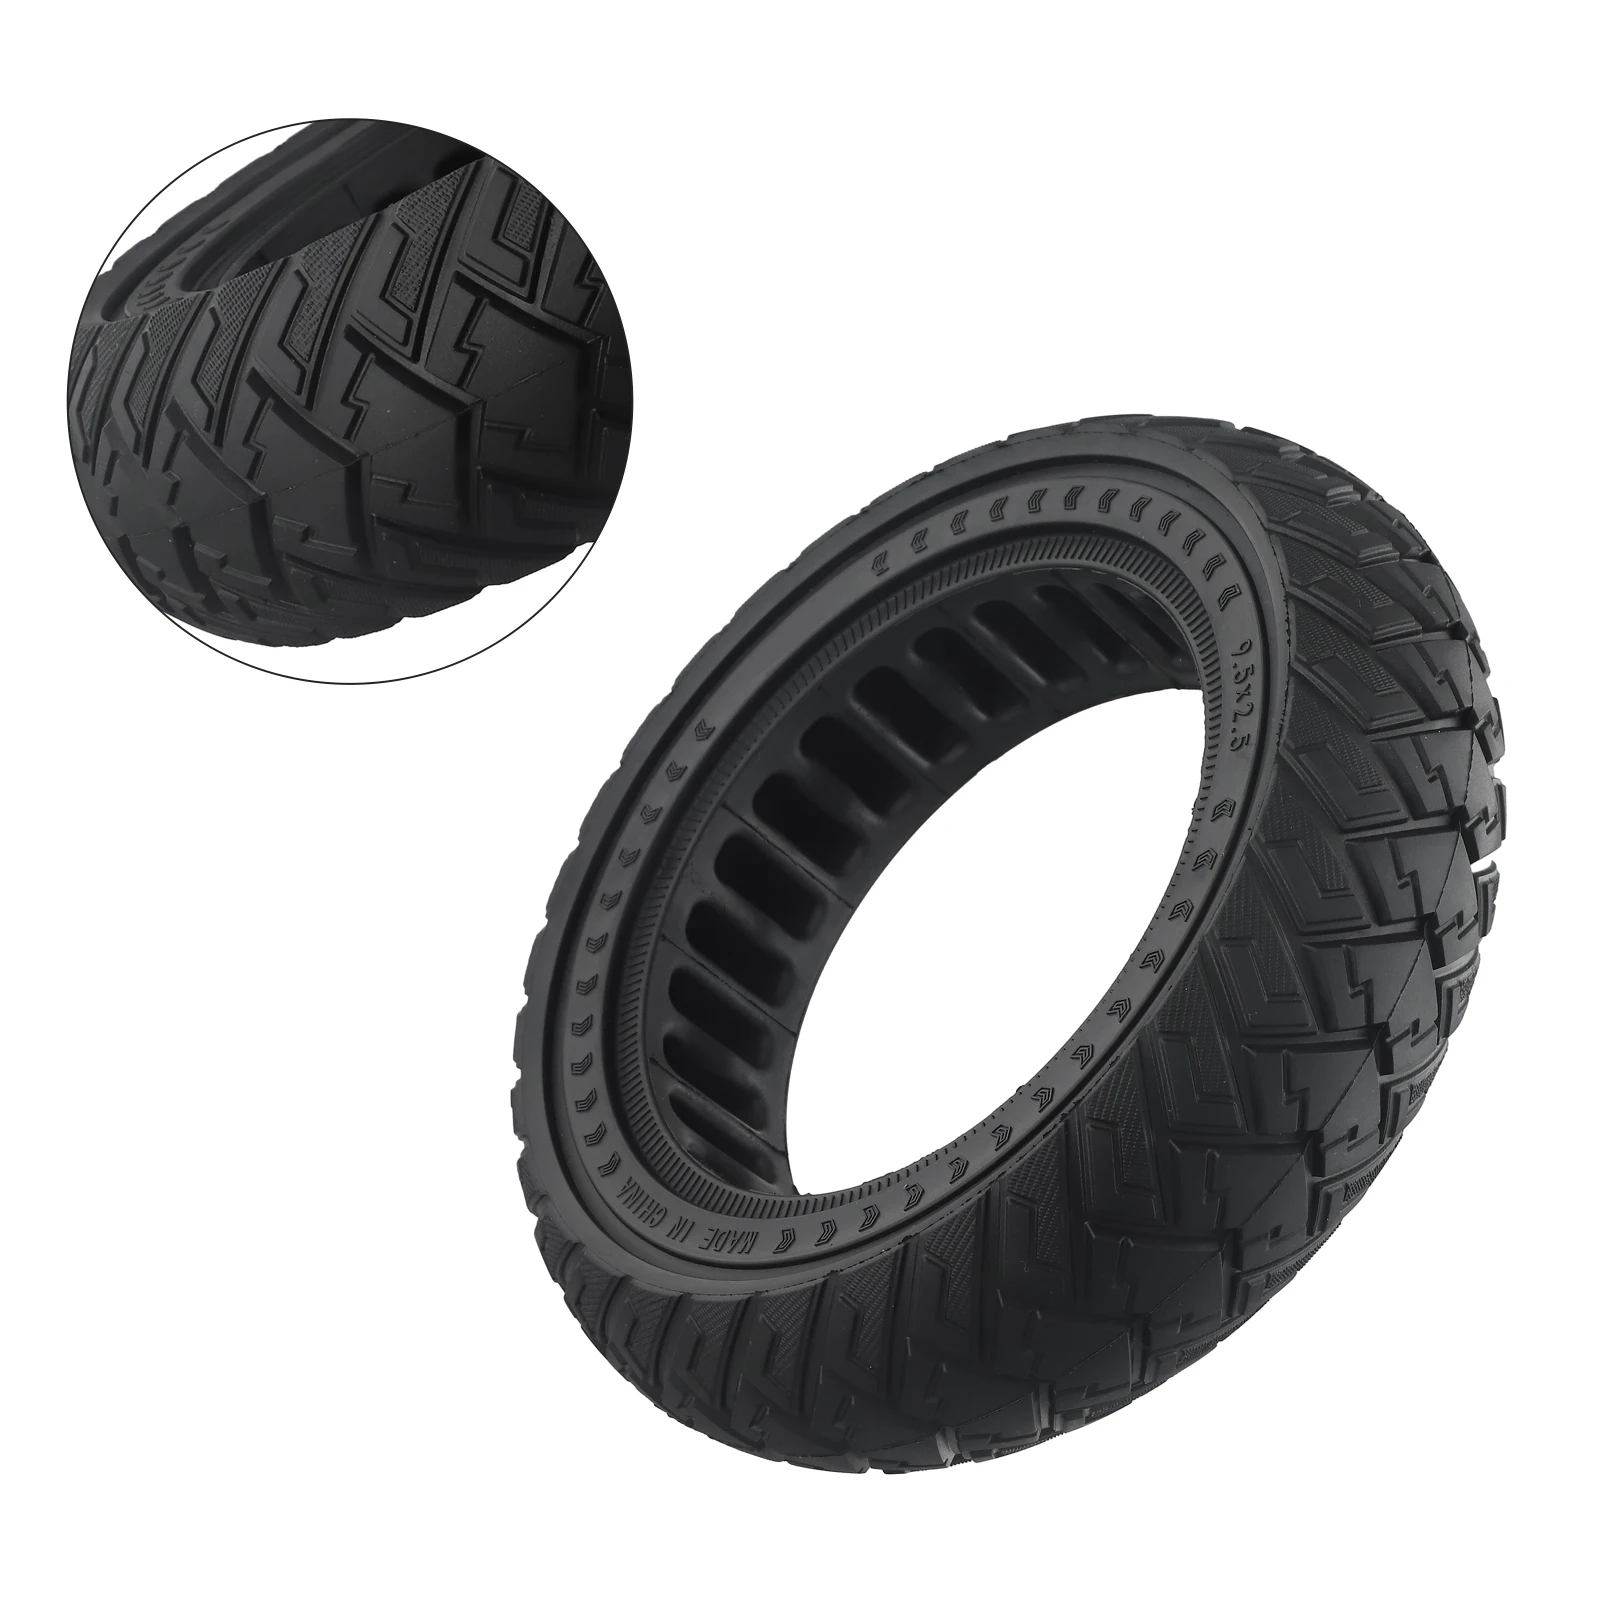 

Optimize Your Scooter's Ride 9 5 inch 9 5x2 50 Solid TIre for NIU KQI3 Electric Scooter Durable Rubber Material